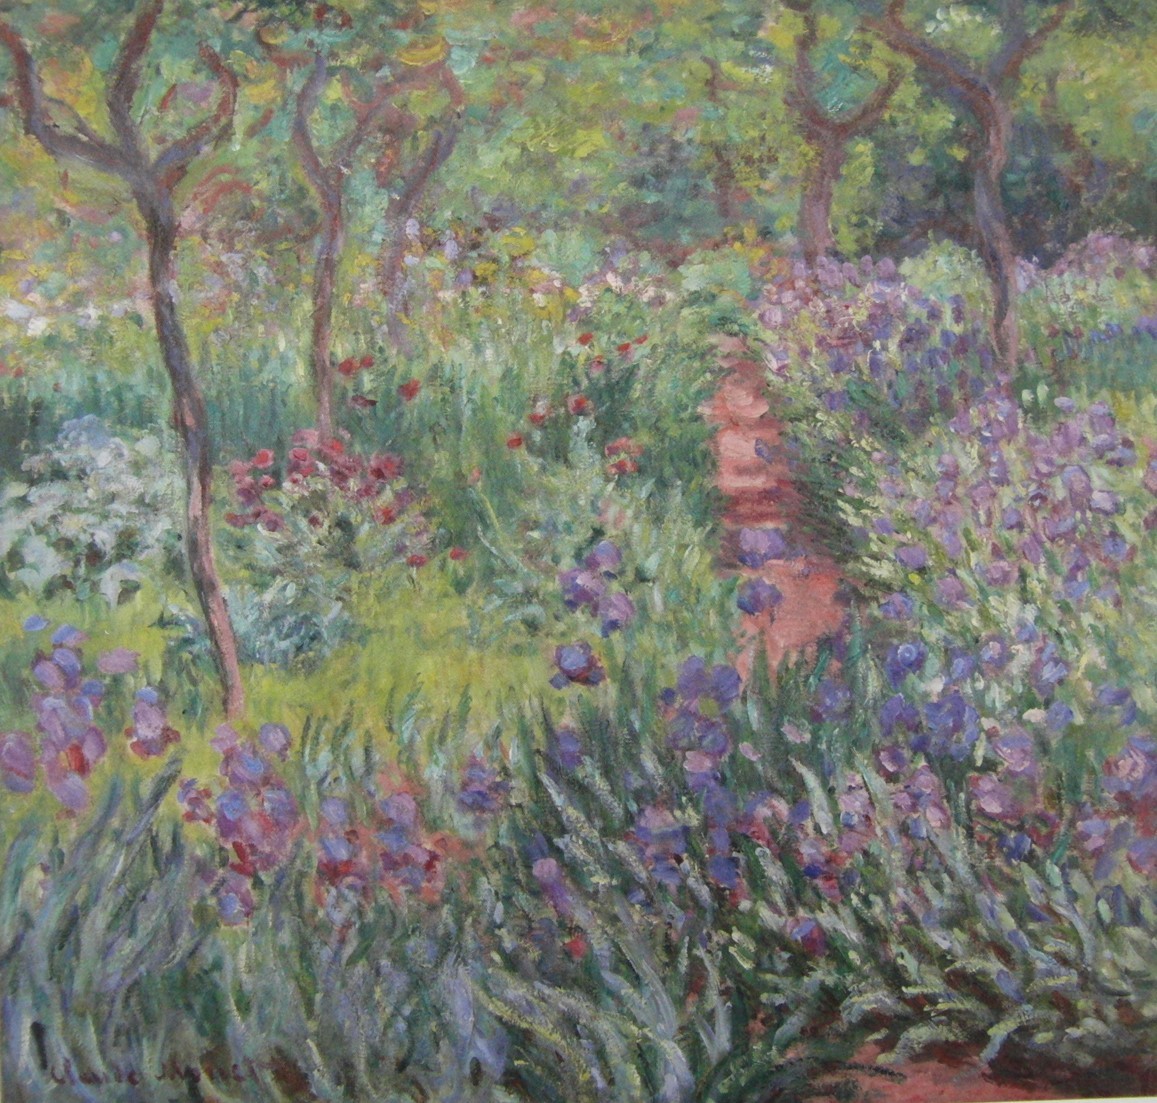 Iris Blooming Garden, Chiverney., Claude Monet, Rare art books and framed paintings, Nature, Landscape, France, New Picture Frame, In good condition, free shipping, Painting, Oil painting, Nature, Landscape painting